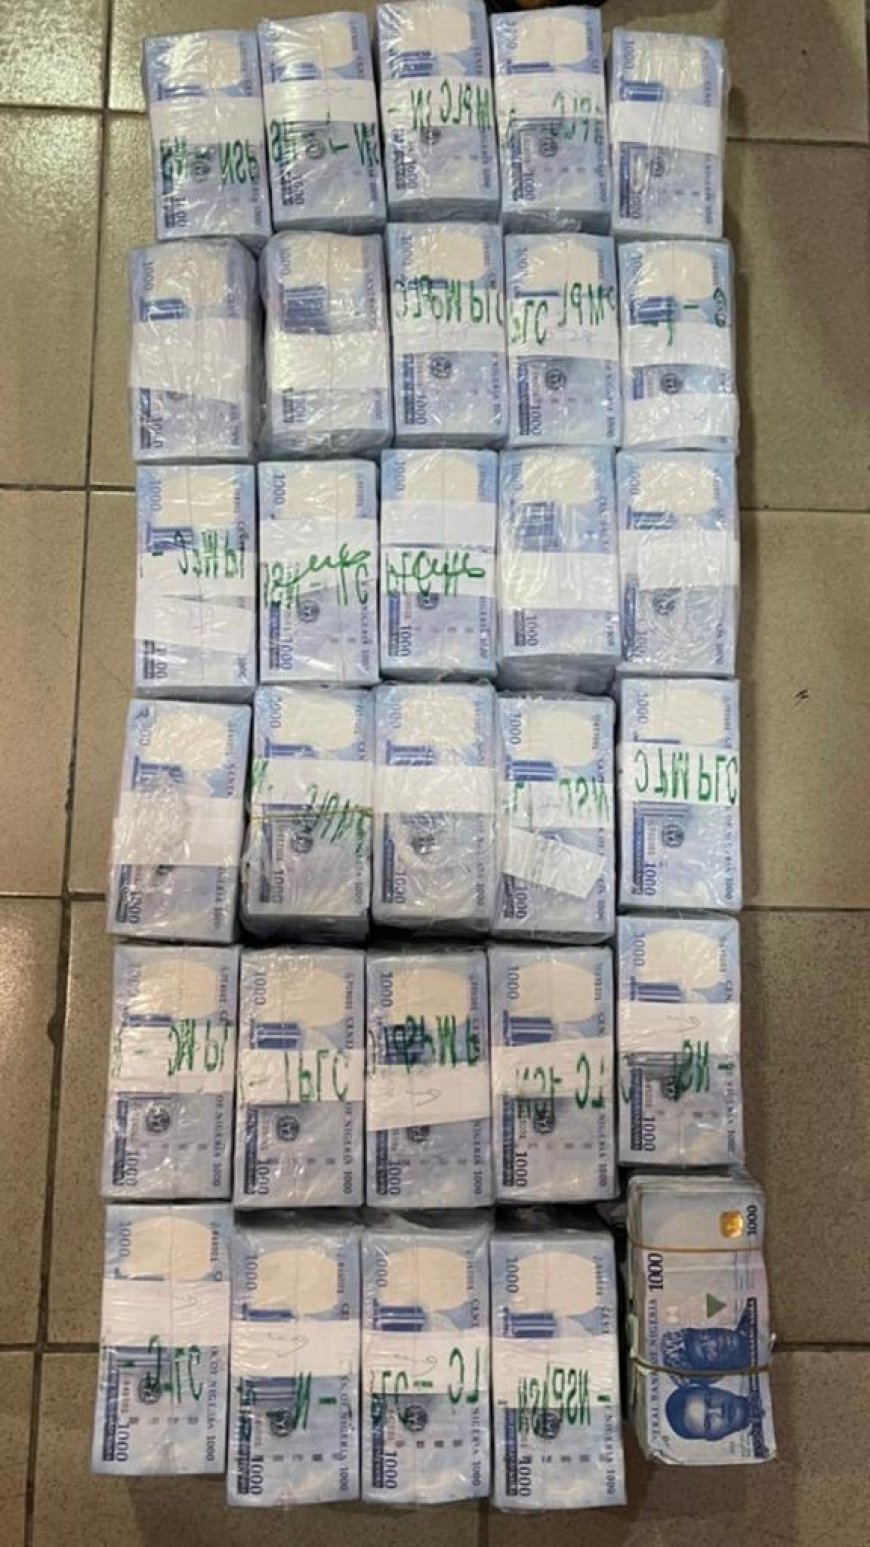 EFCC Intercepts N32.4million Allegedly Meant For Vote-Buying In Lagos